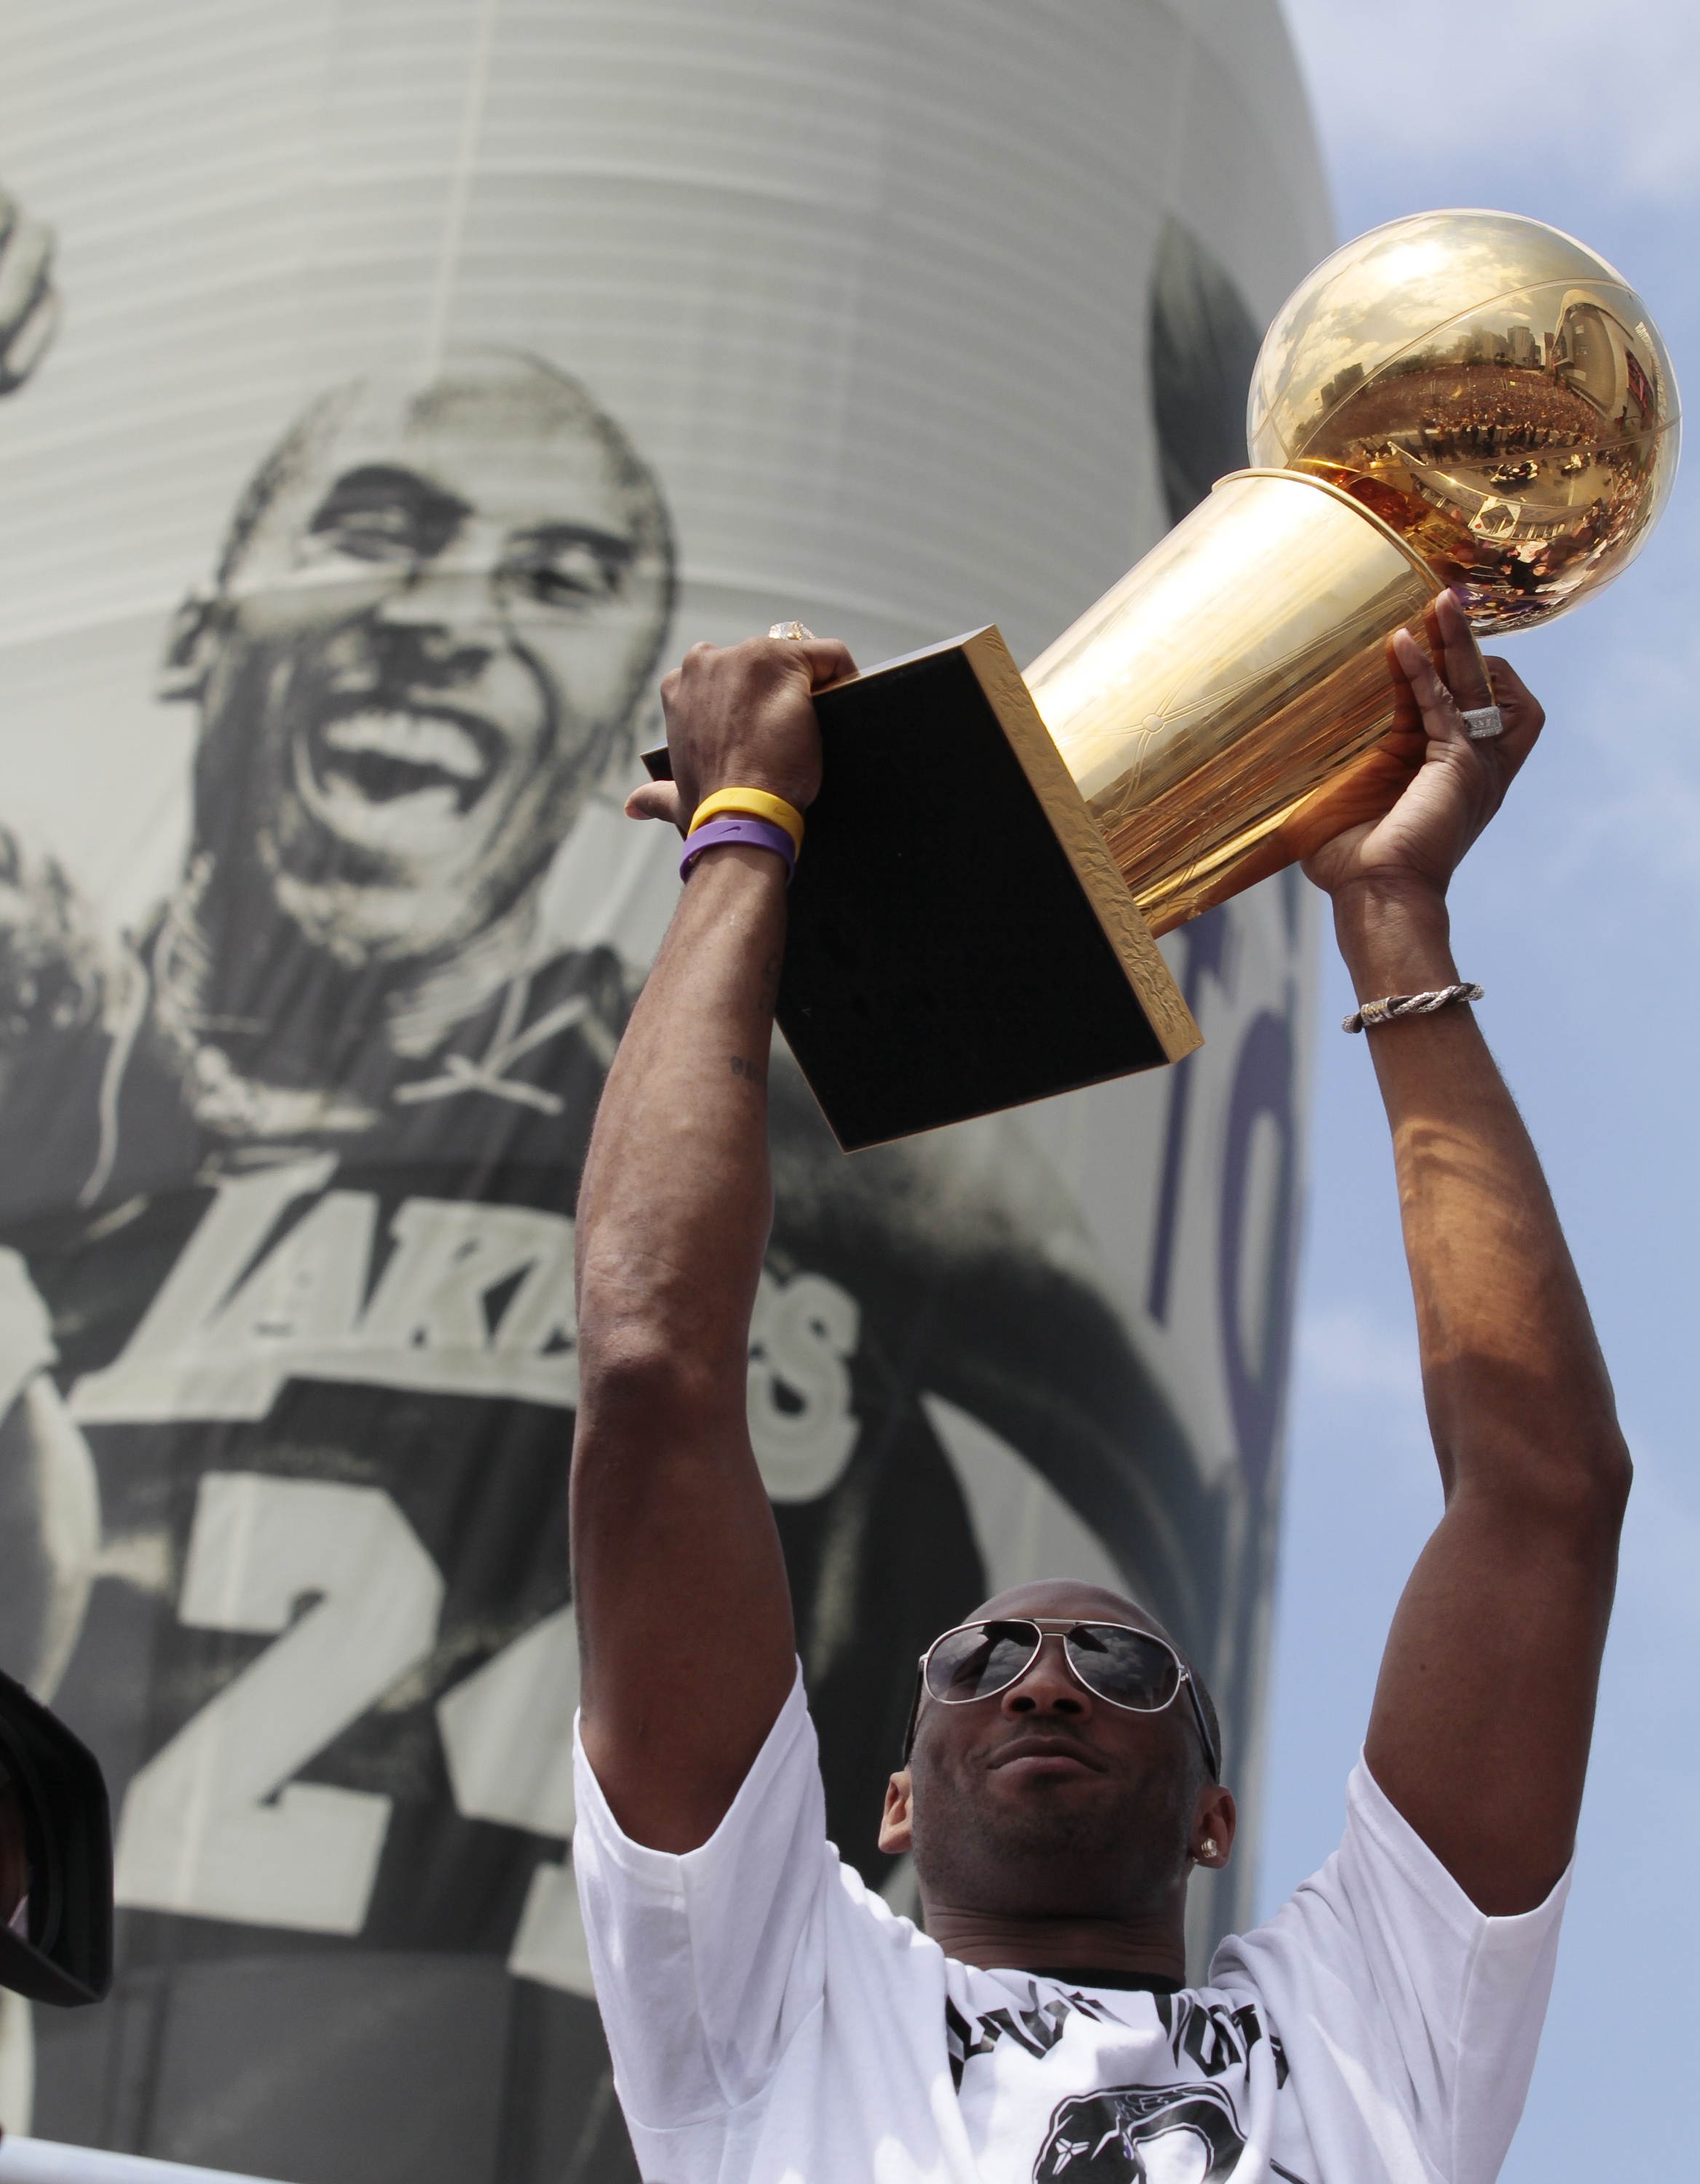 Kobe Bryant raises the NBA championship trophy in front of a poster of himself on the Staples Center during a victory parade for the teams 16th NBA title in Los Angeles on June 21, 2010. His fifth and final title, following a hard-fought seven-game Finals against the Boston Celtics, was — in his words — the most satisfying of them all.